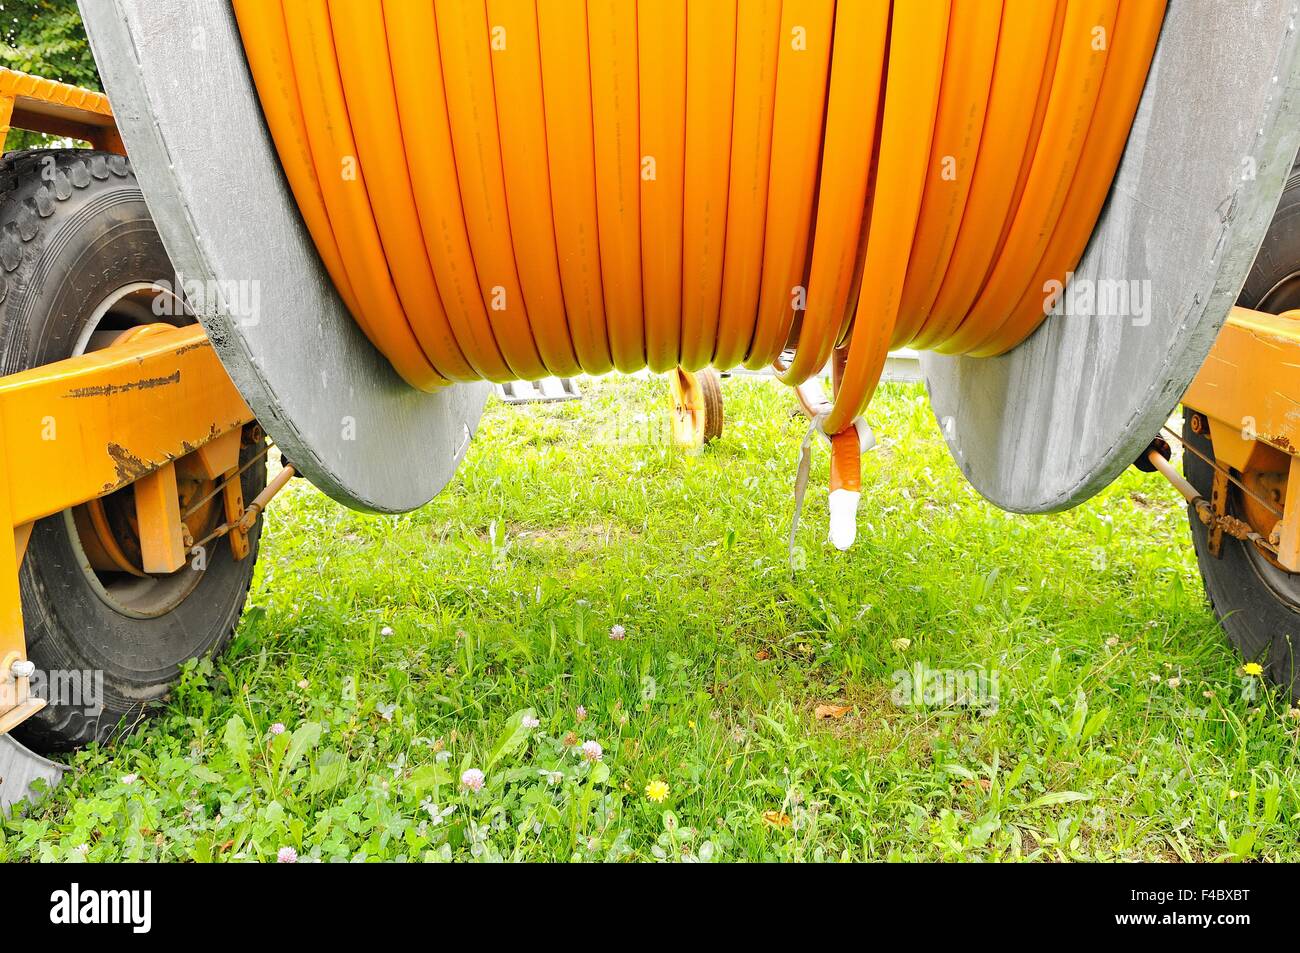 Cable drum trailer with broadband cable drum Stock Photo